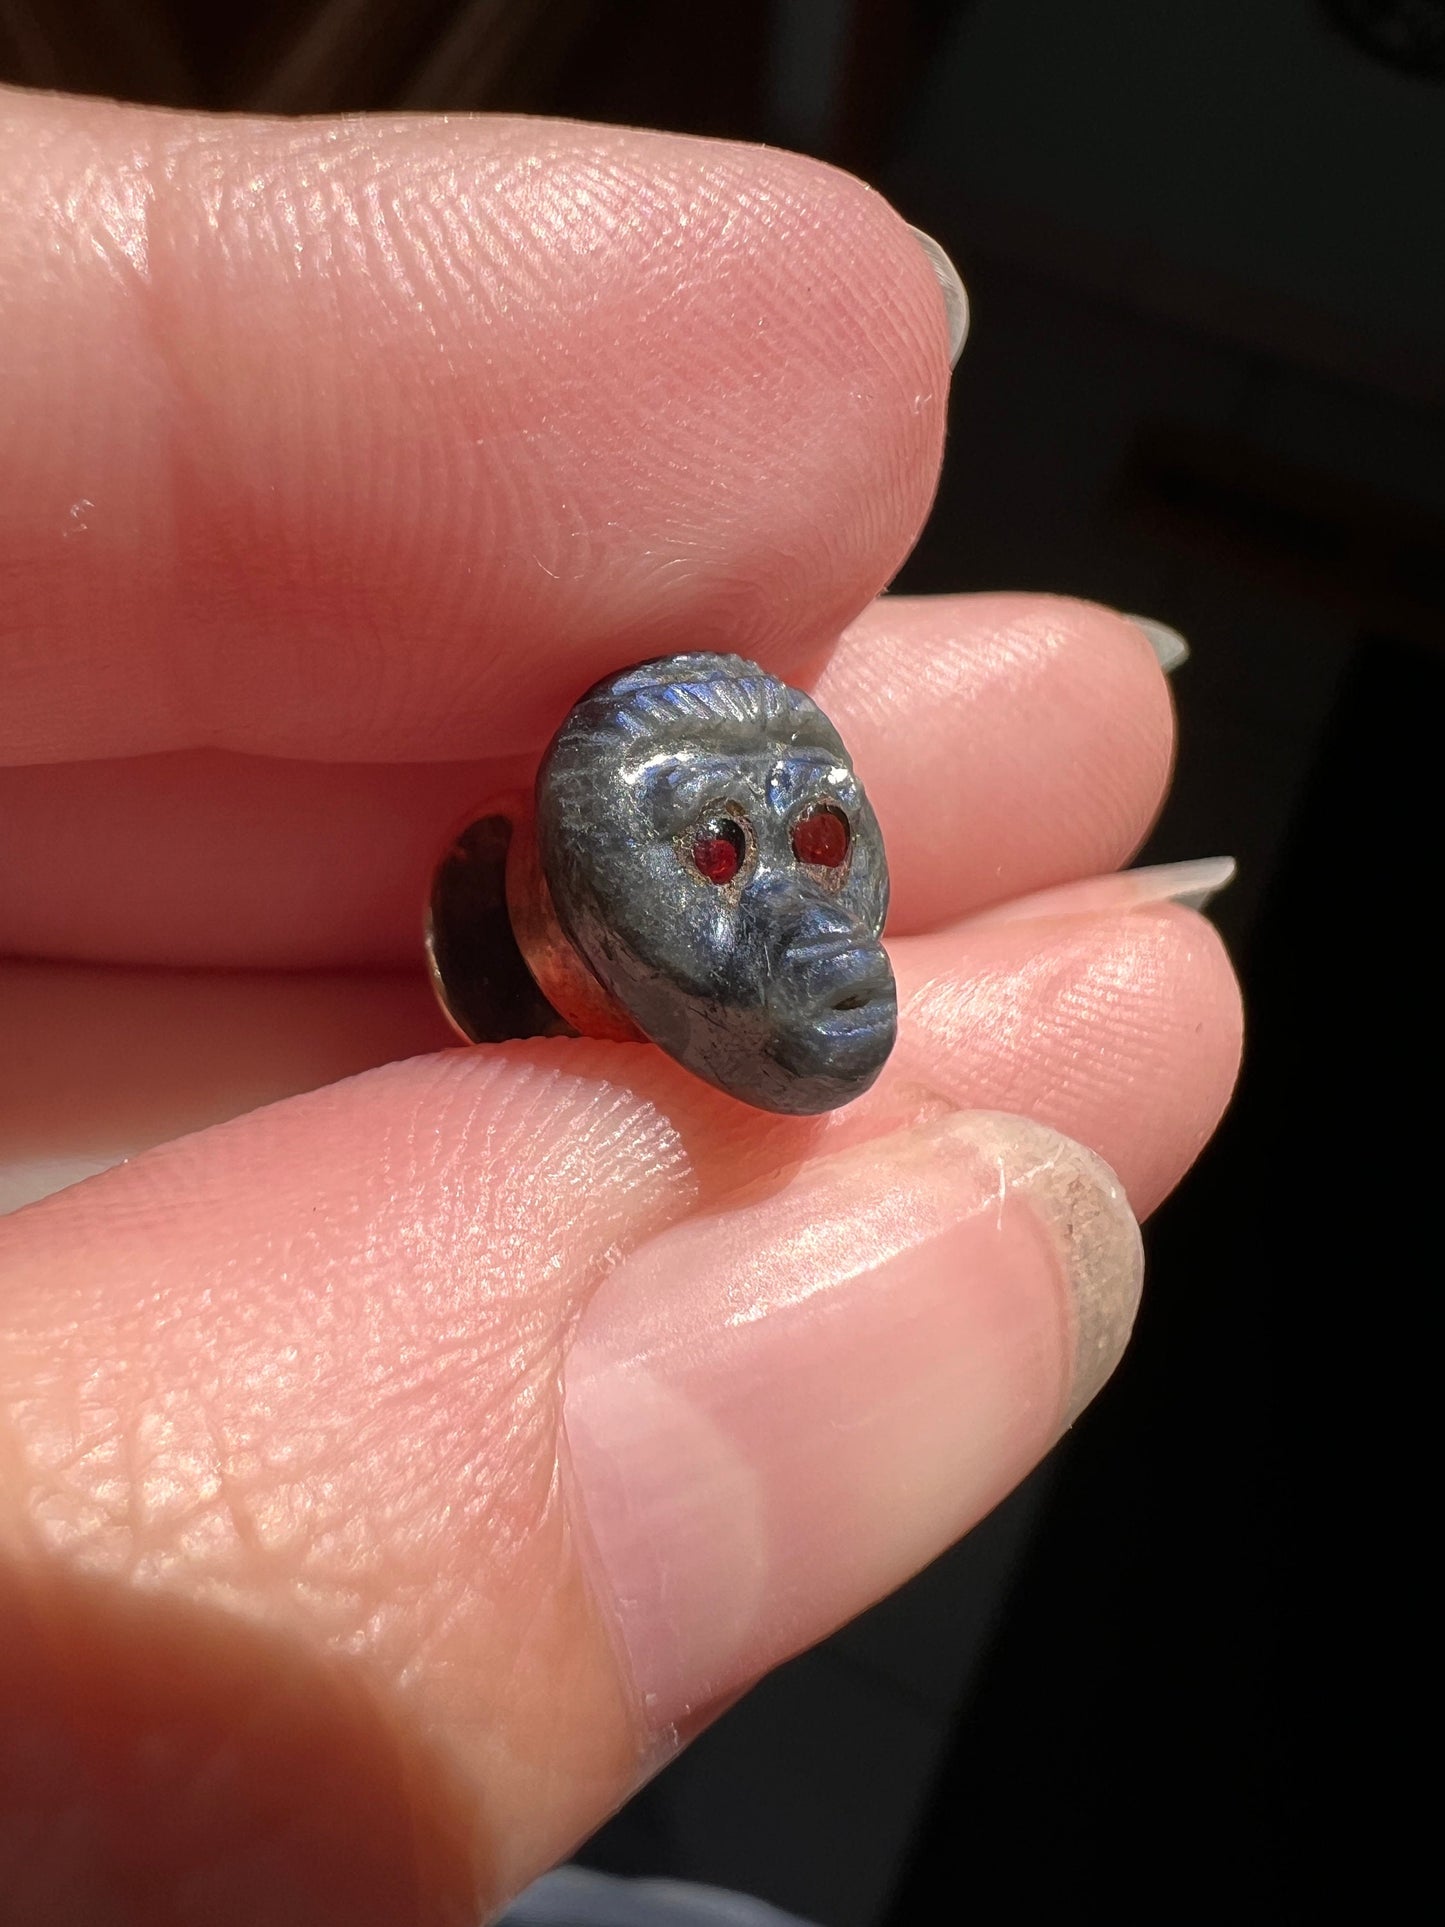 MONKEY Victorian LABRADORITE 14k Gold Figural ANIMAL Jewelry Button for Conversion Charm Pendant Earring Ring Rare Ruby Eyes Blue Flash Ape